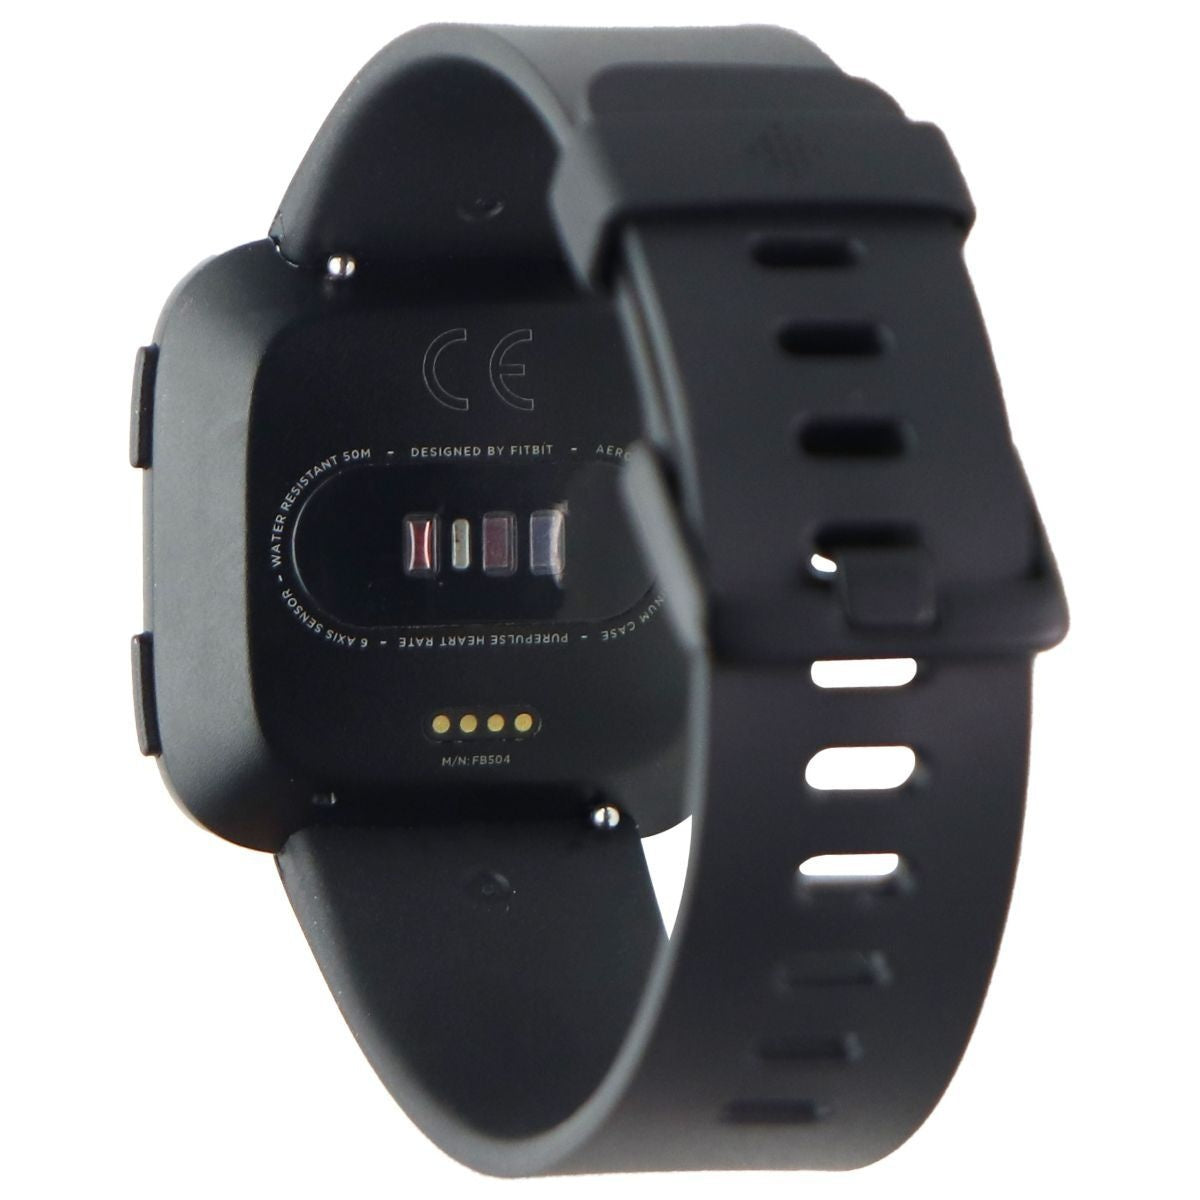 Fitbit Versa Smart Watch Bluetooth Fitness Tracker - Black (FB504) / One Size Smart Watches Fitbit    - Simple Cell Bulk Wholesale Pricing - USA Seller